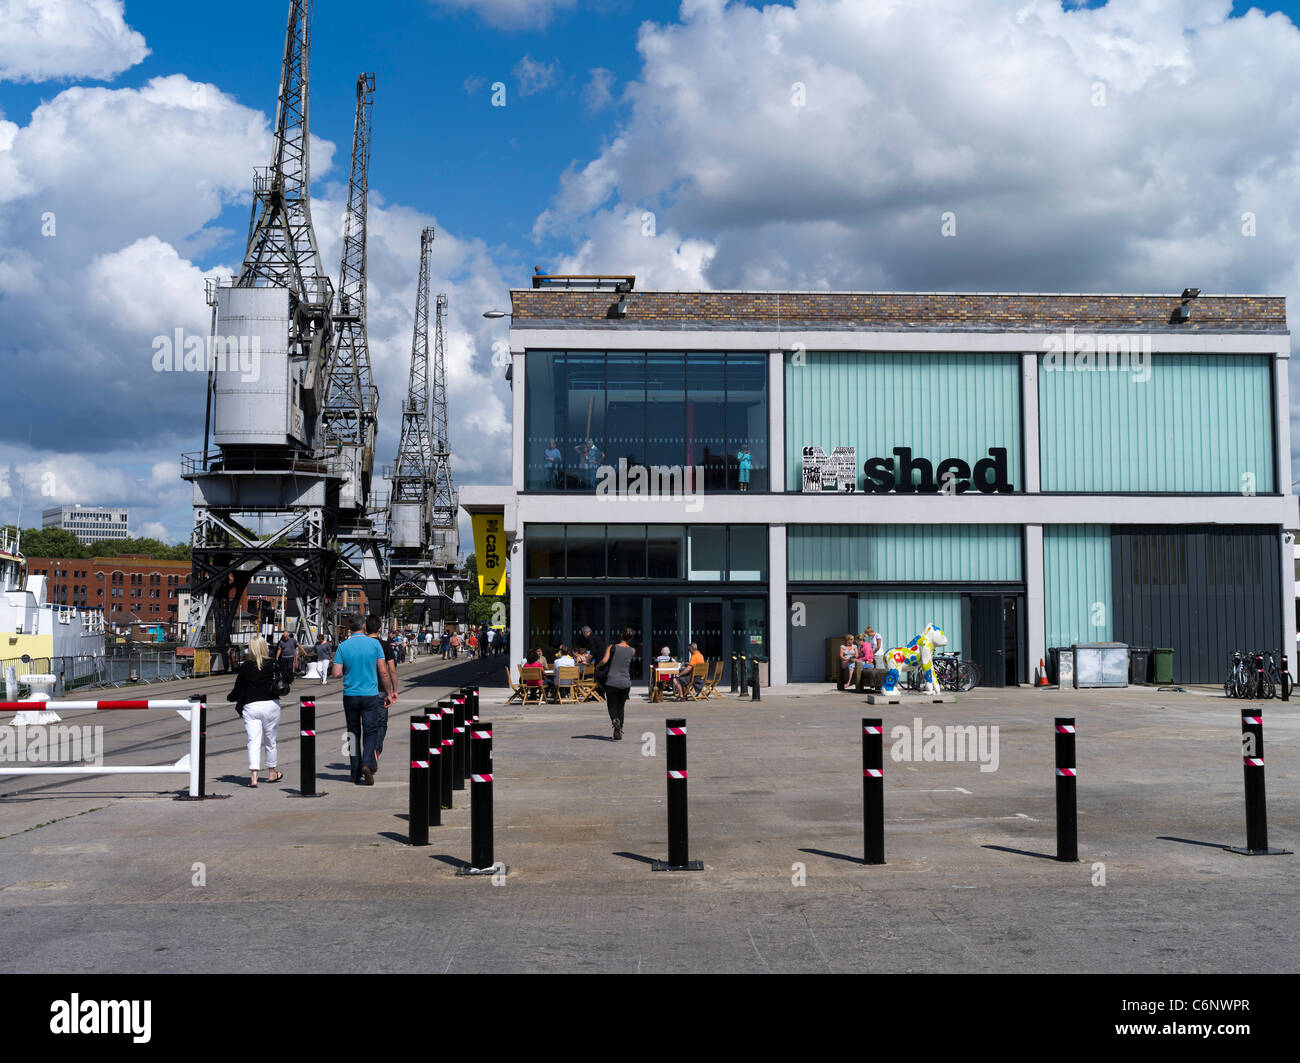 dh M shed dock museum DOCKS BRISTOL People walking bristol waterfront quayside mshed quay uk Stock Photo